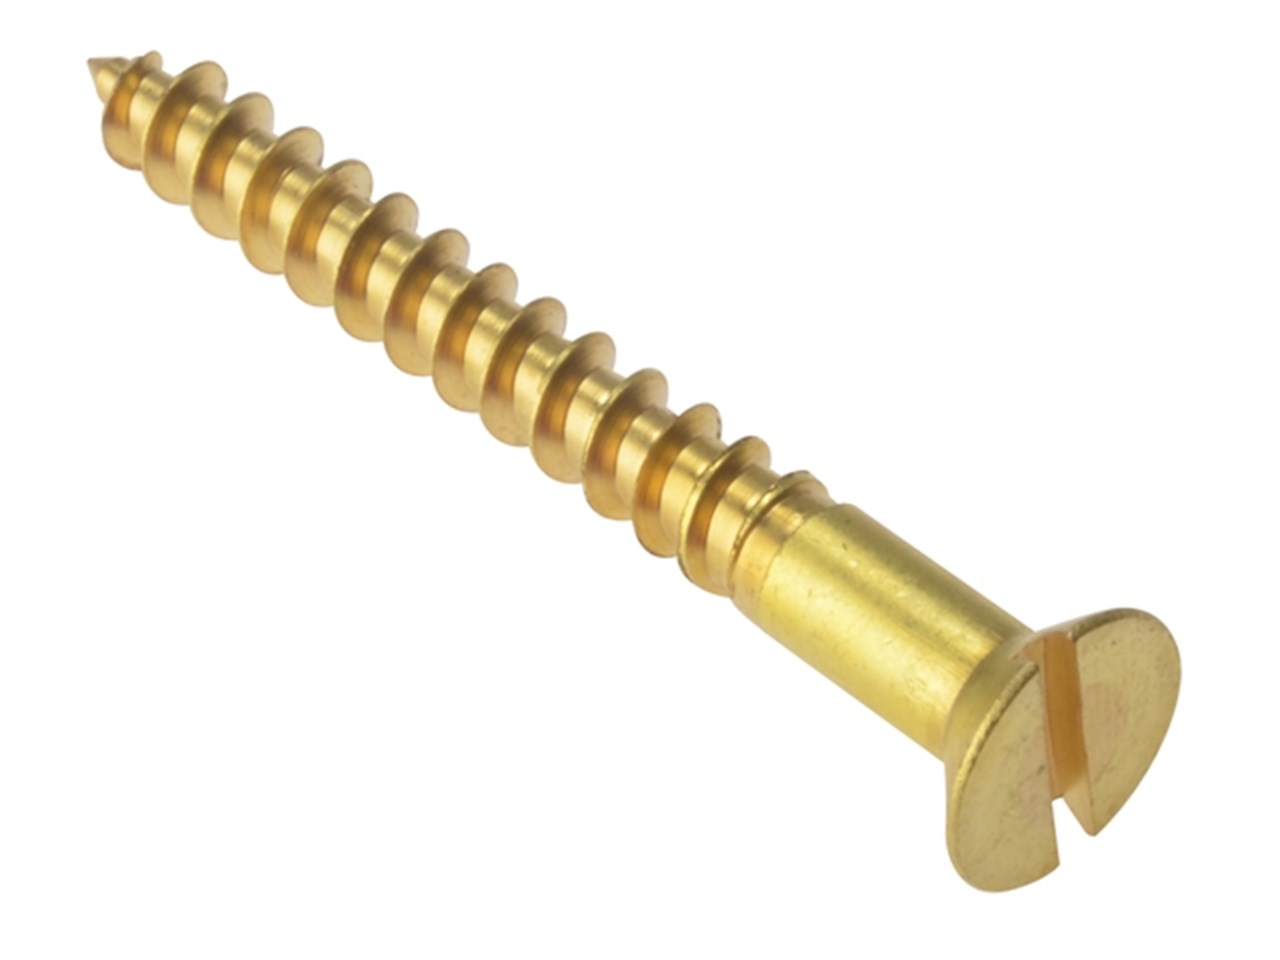 Forgefix Csk310br Wood Screw Slotted Countersunk Solid Brass 3 X 10 Box 100